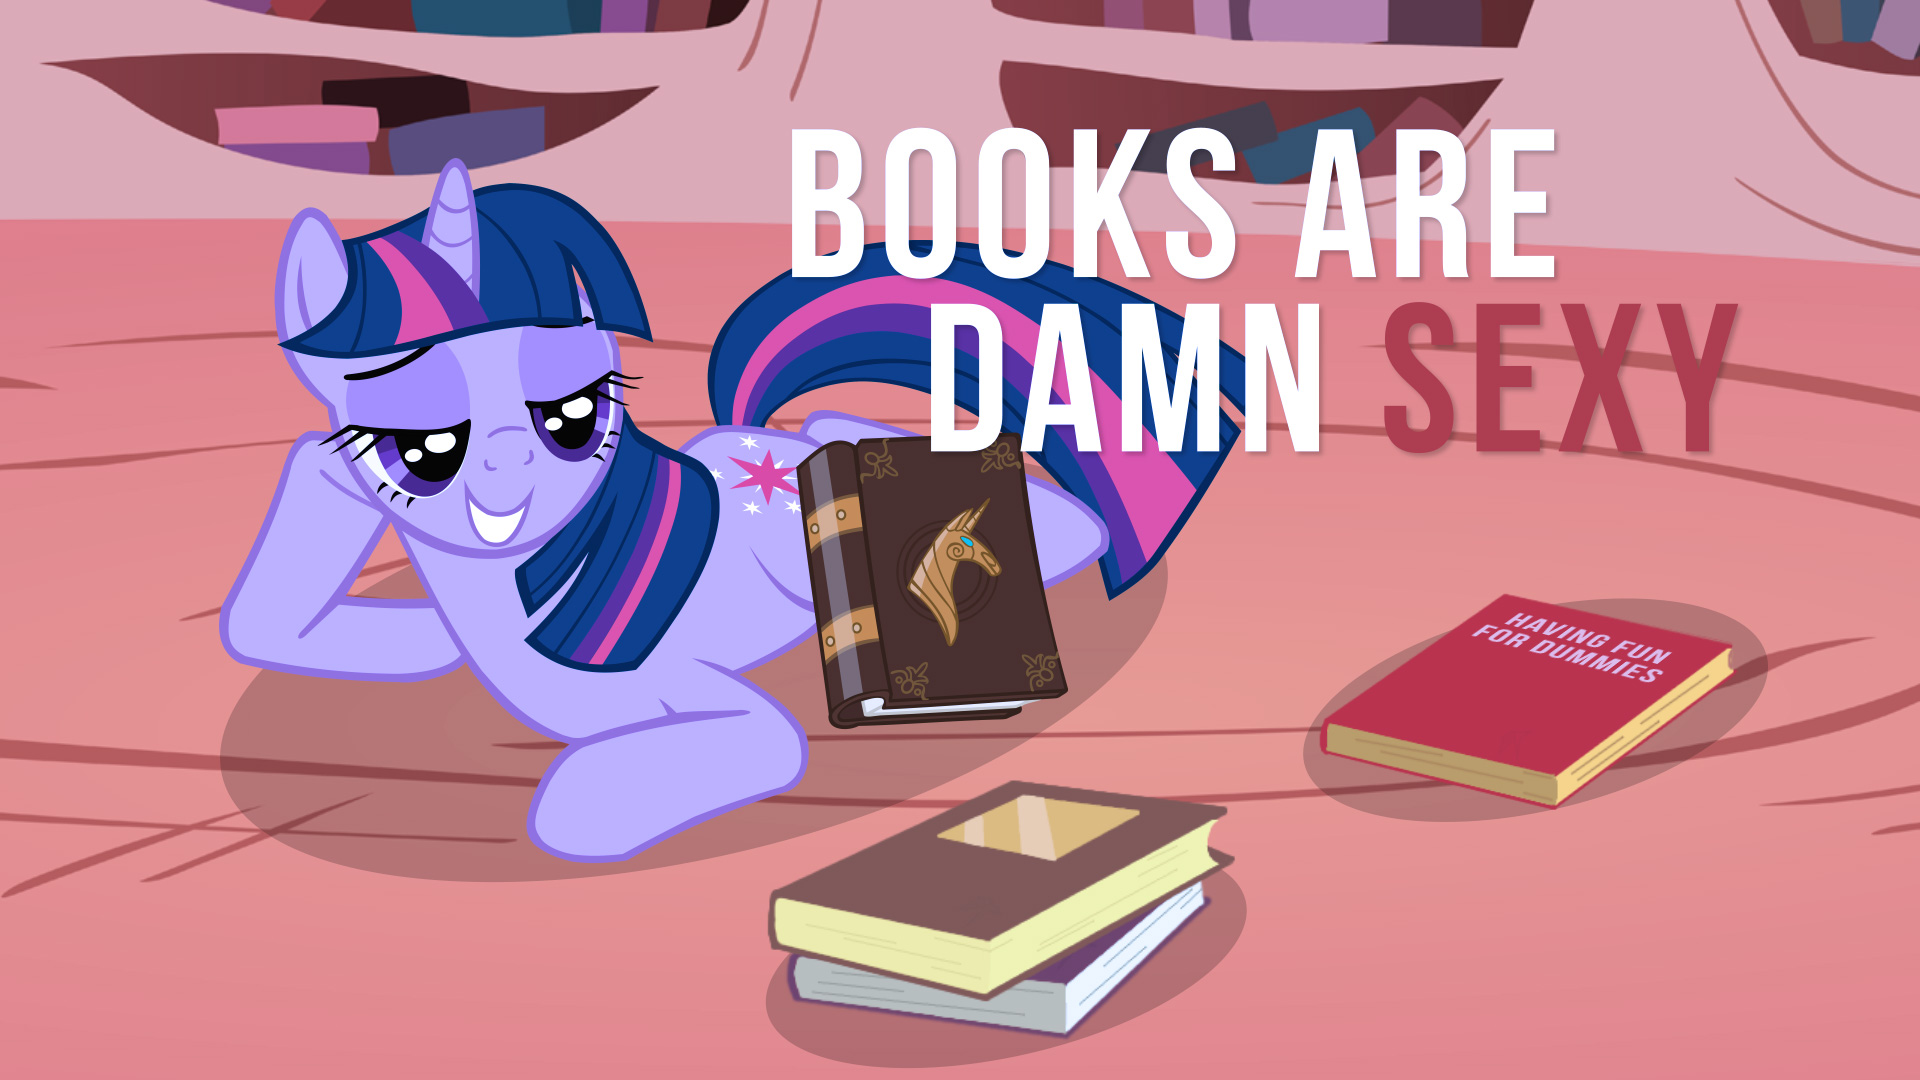 She reads all day wallpaper 3 by DabuPL